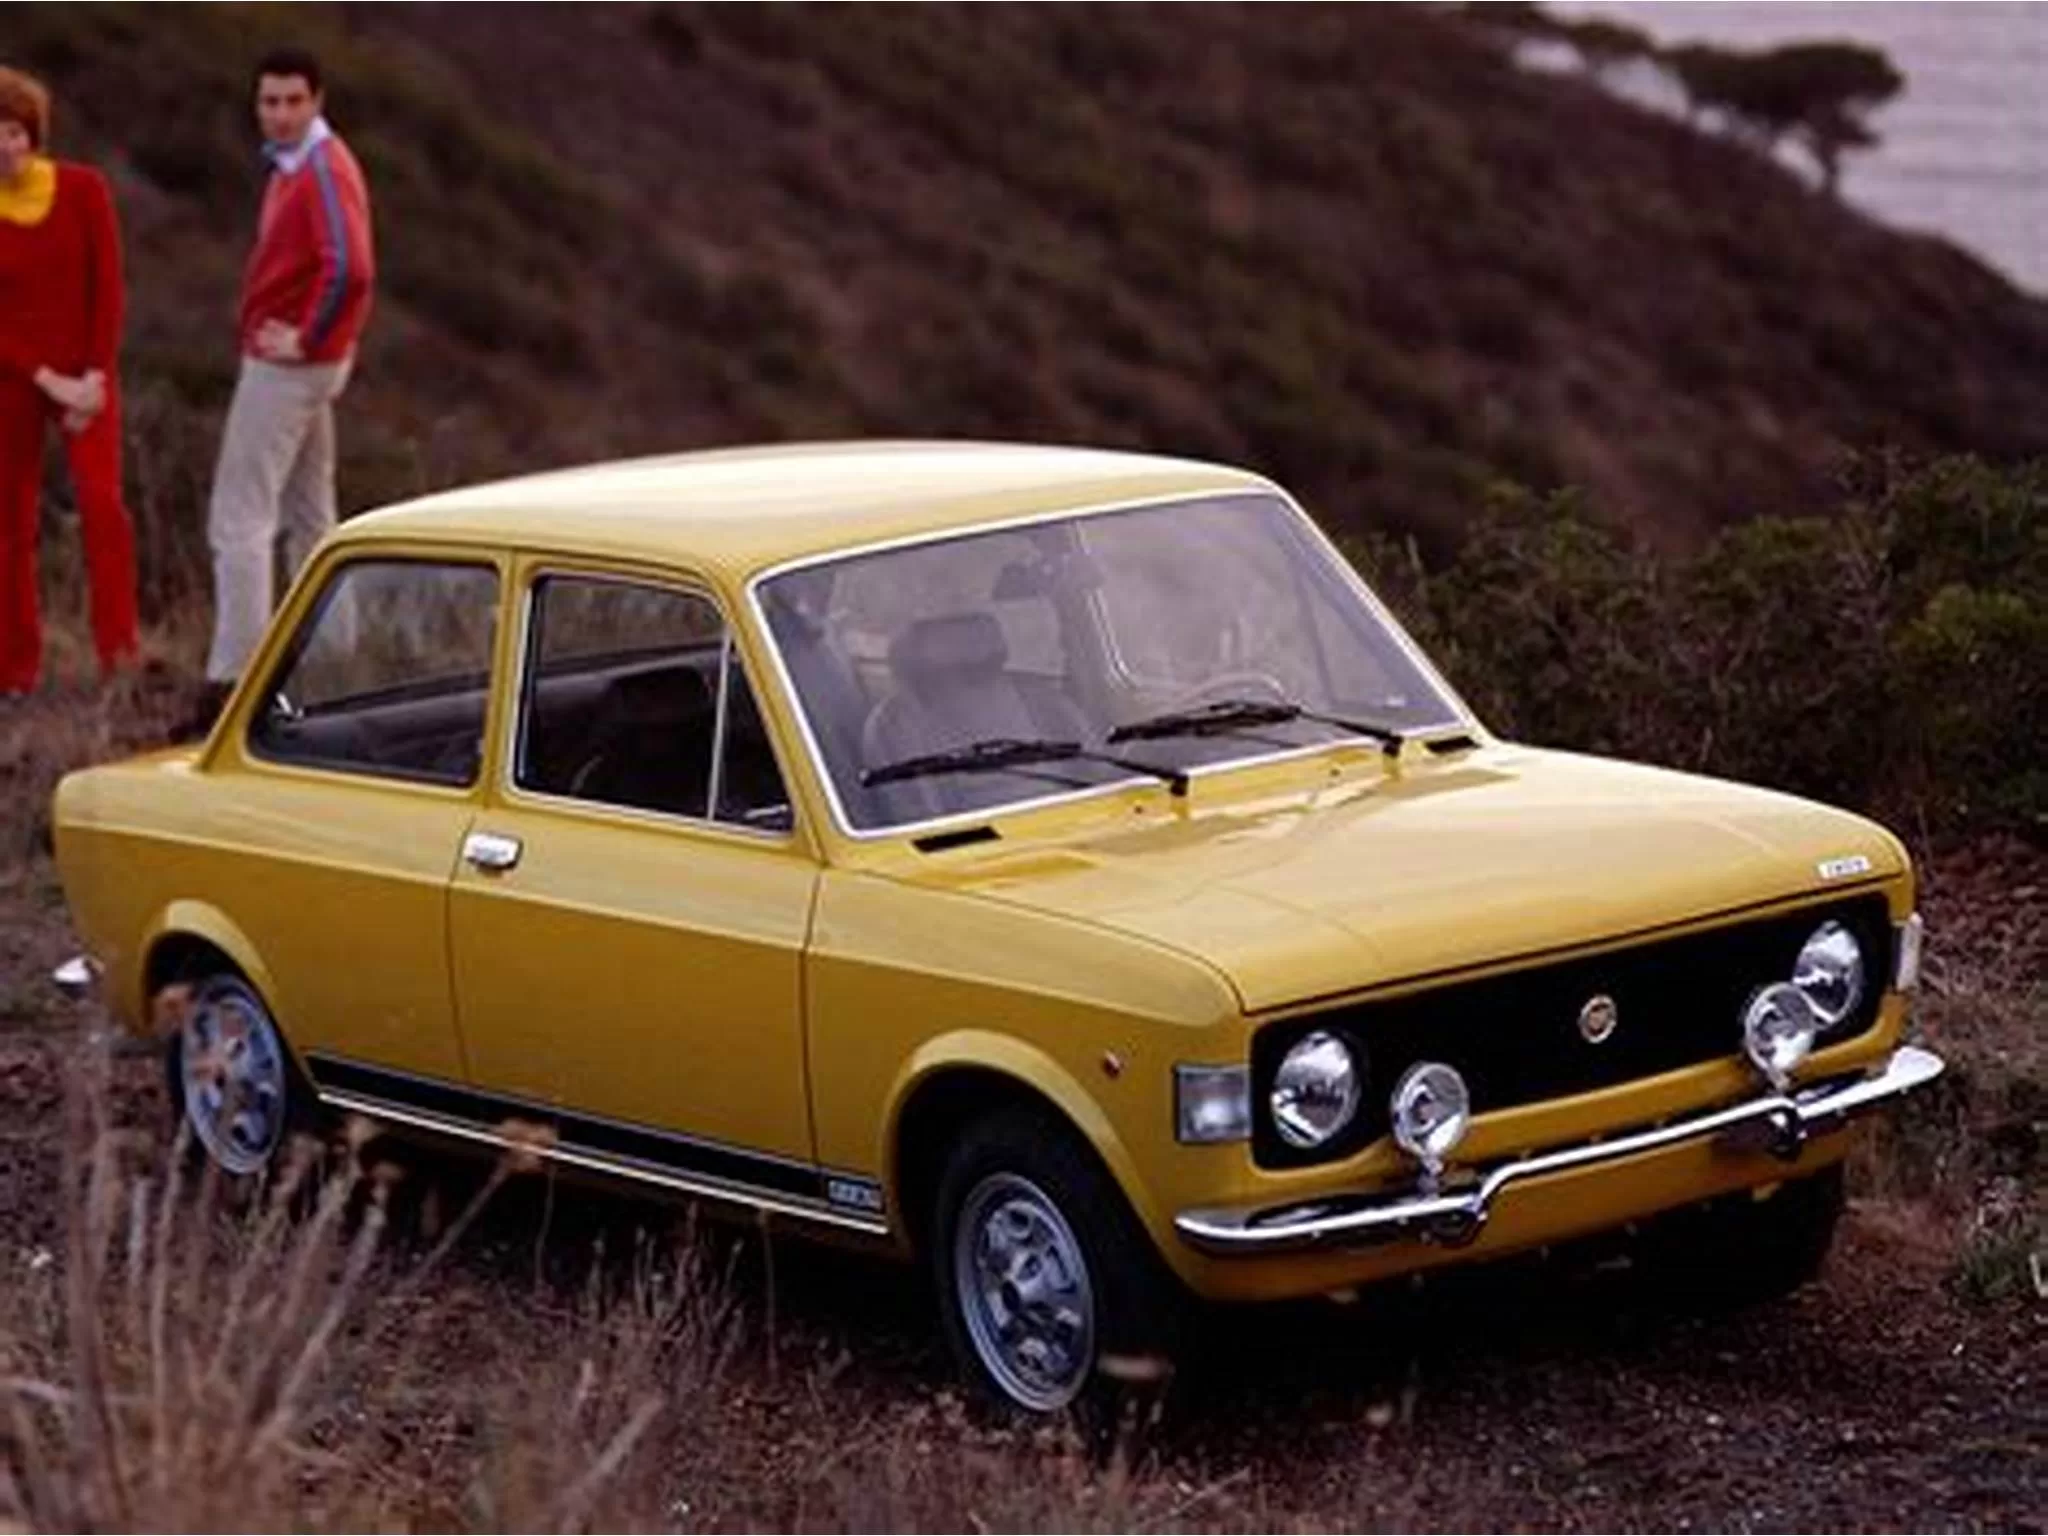 Fiat 125 Rally Car Conquered Rallying’s Golden Era, But How？插图5